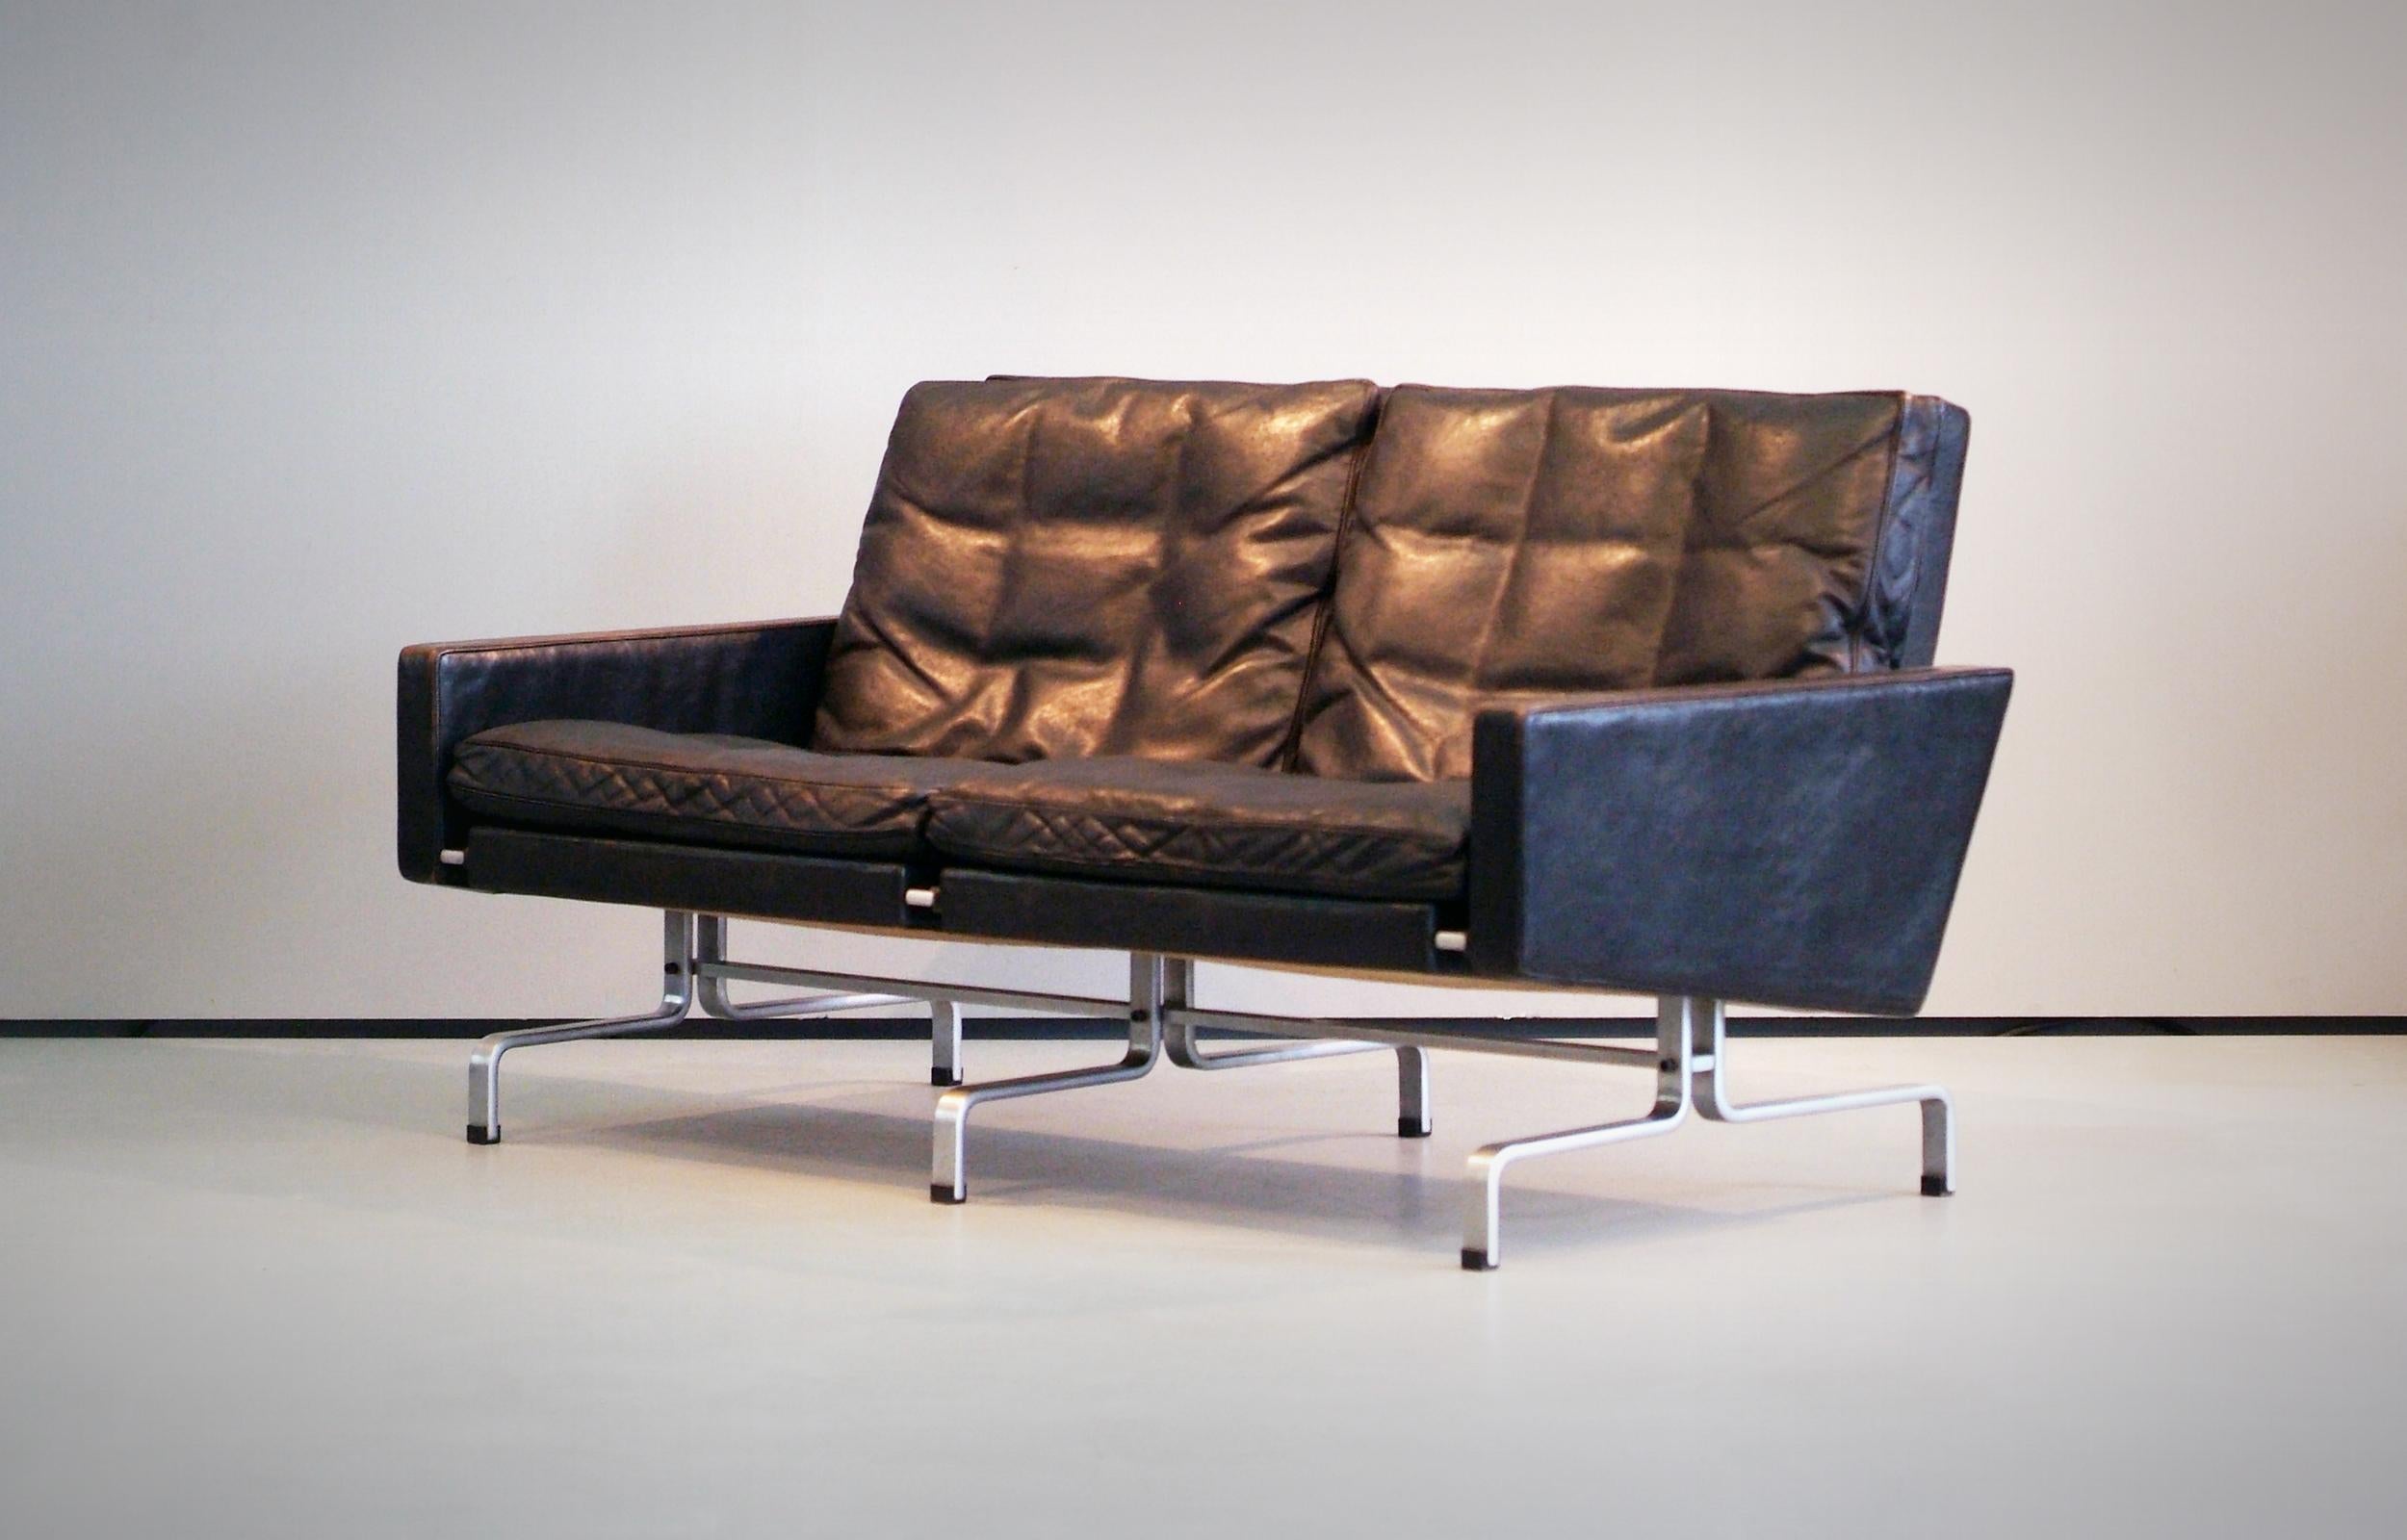 Poul Kjaerholm PK31/2 Sofa with black leather and (matte) chromed steel. Produced by E. Kold Christensen - Early Version. Marked with EKC Imprint. Wonderful all original condition - very small 
craquelé areas (in the upper leather layer) on the